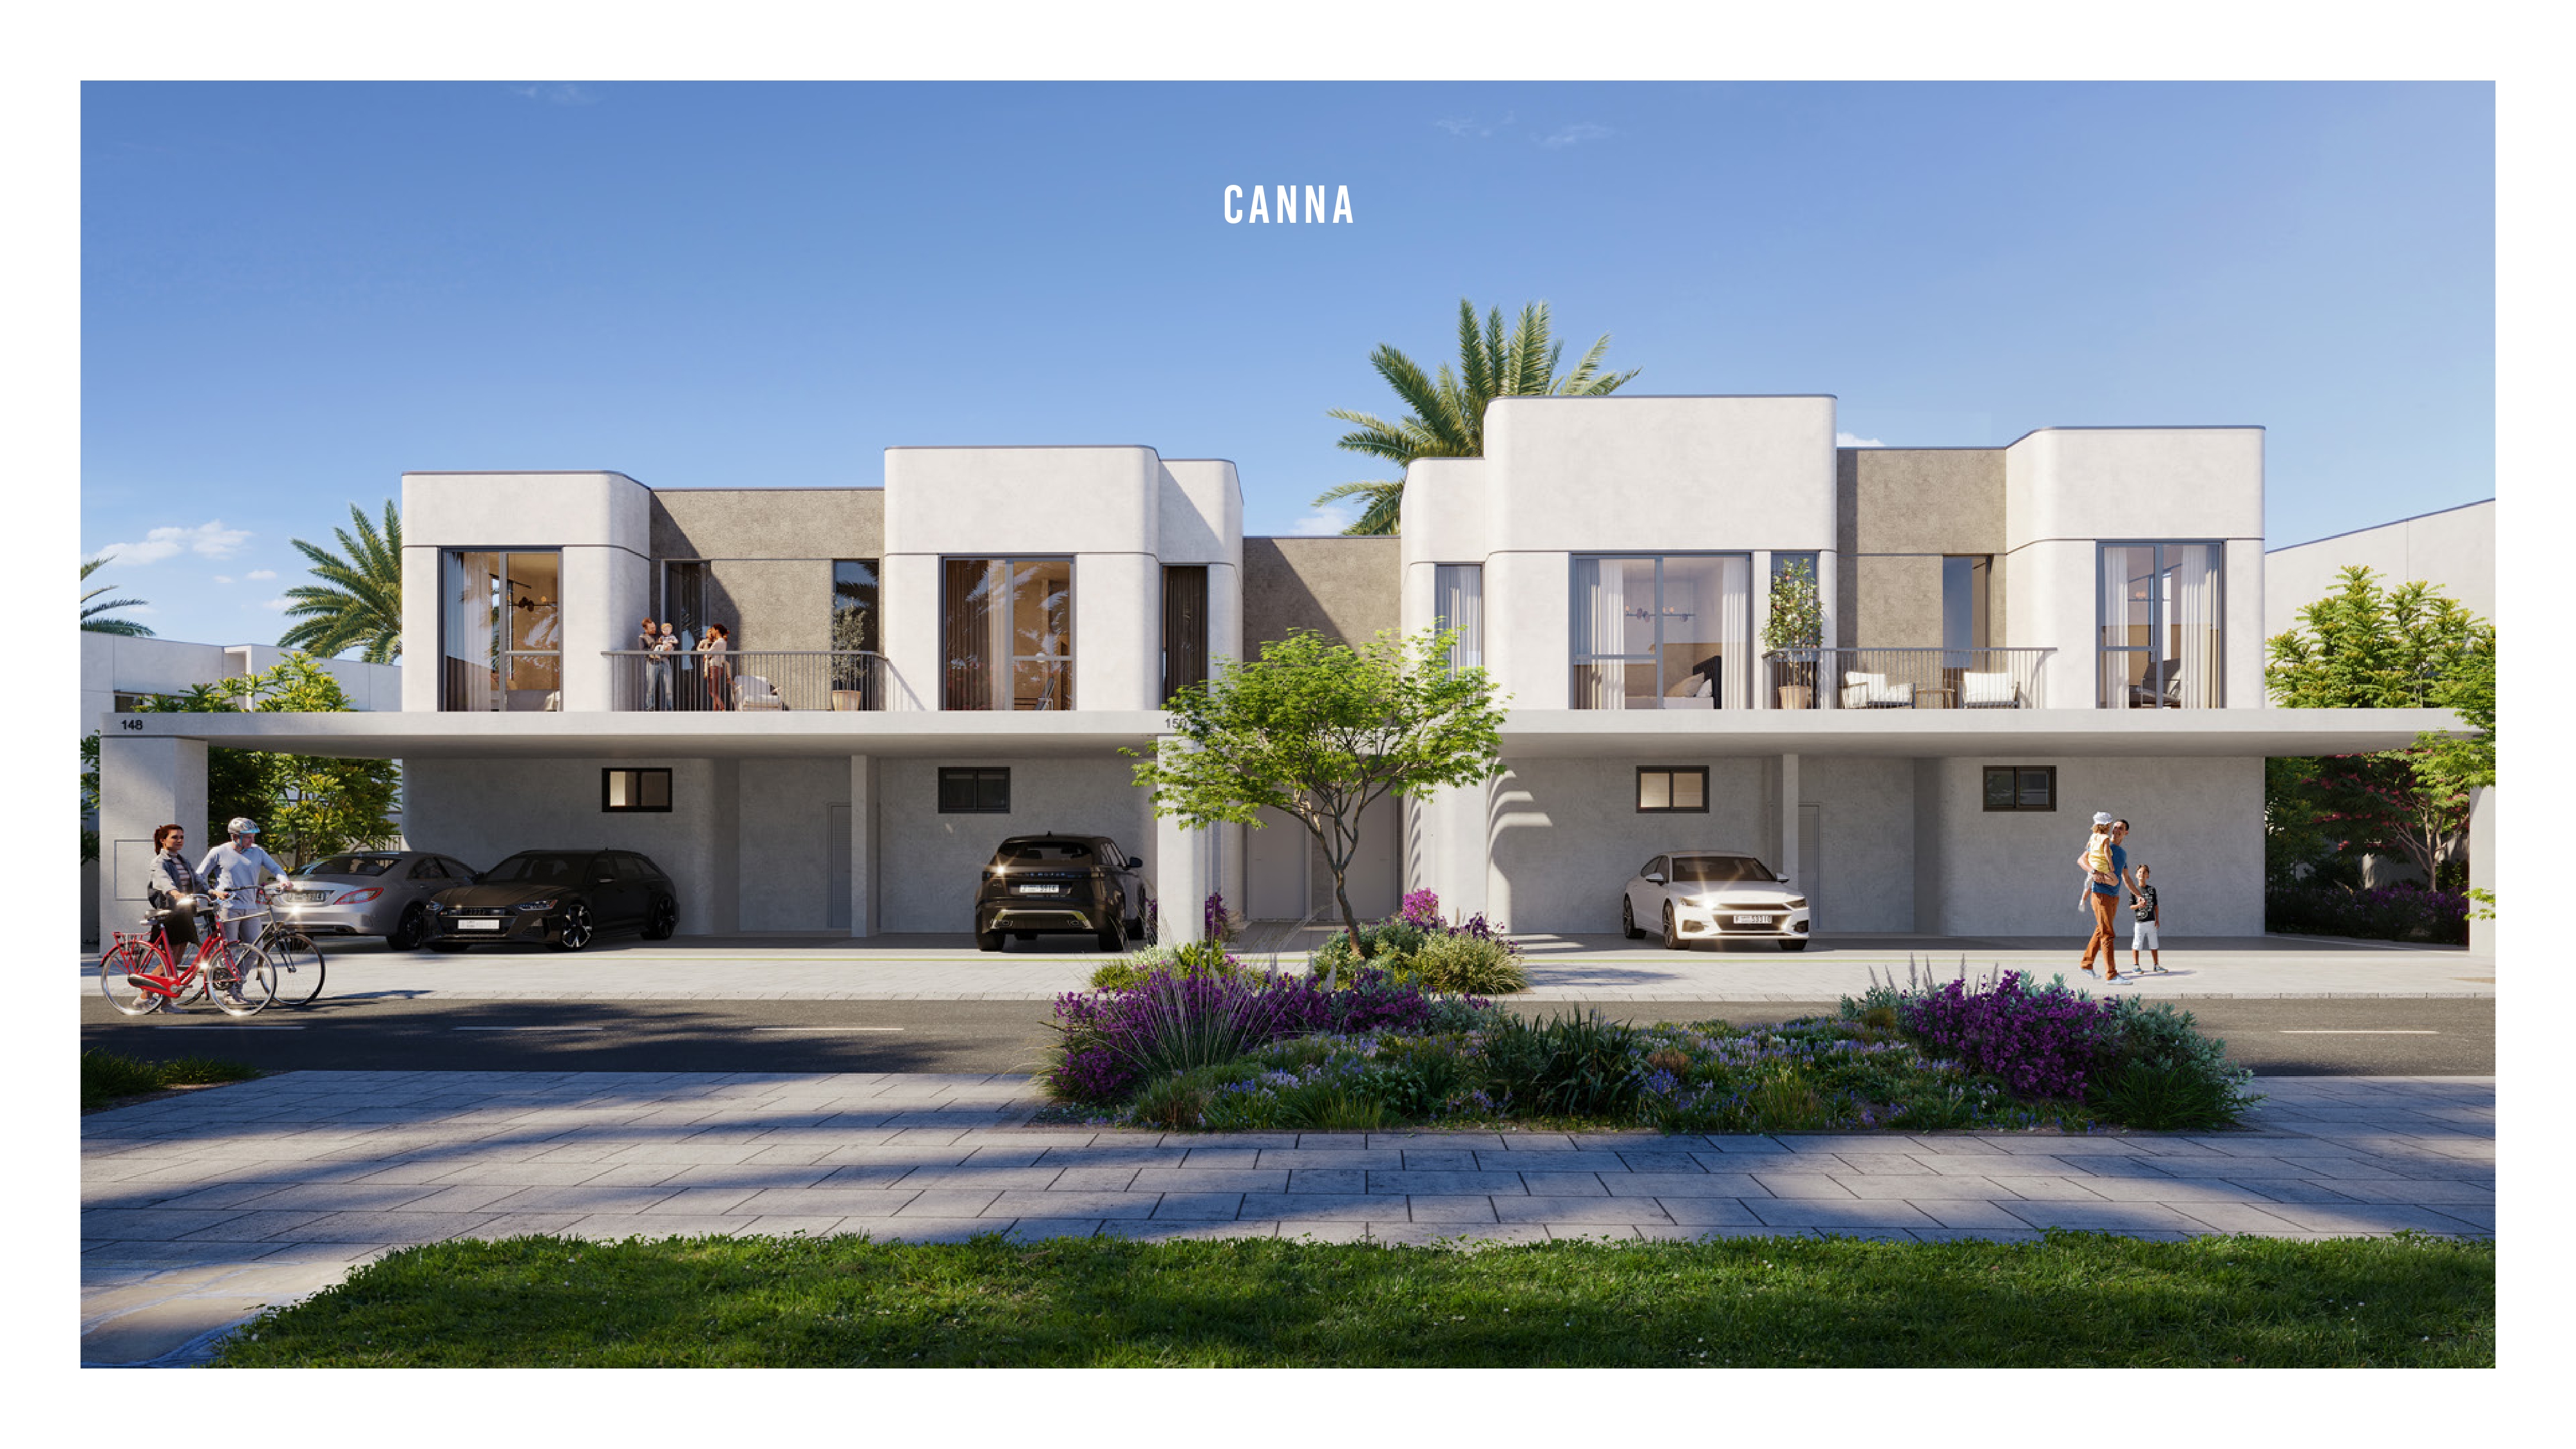 NIMA The Valley - CANNA: Modernist Architecture Townhouse with 4 Bedroom I A